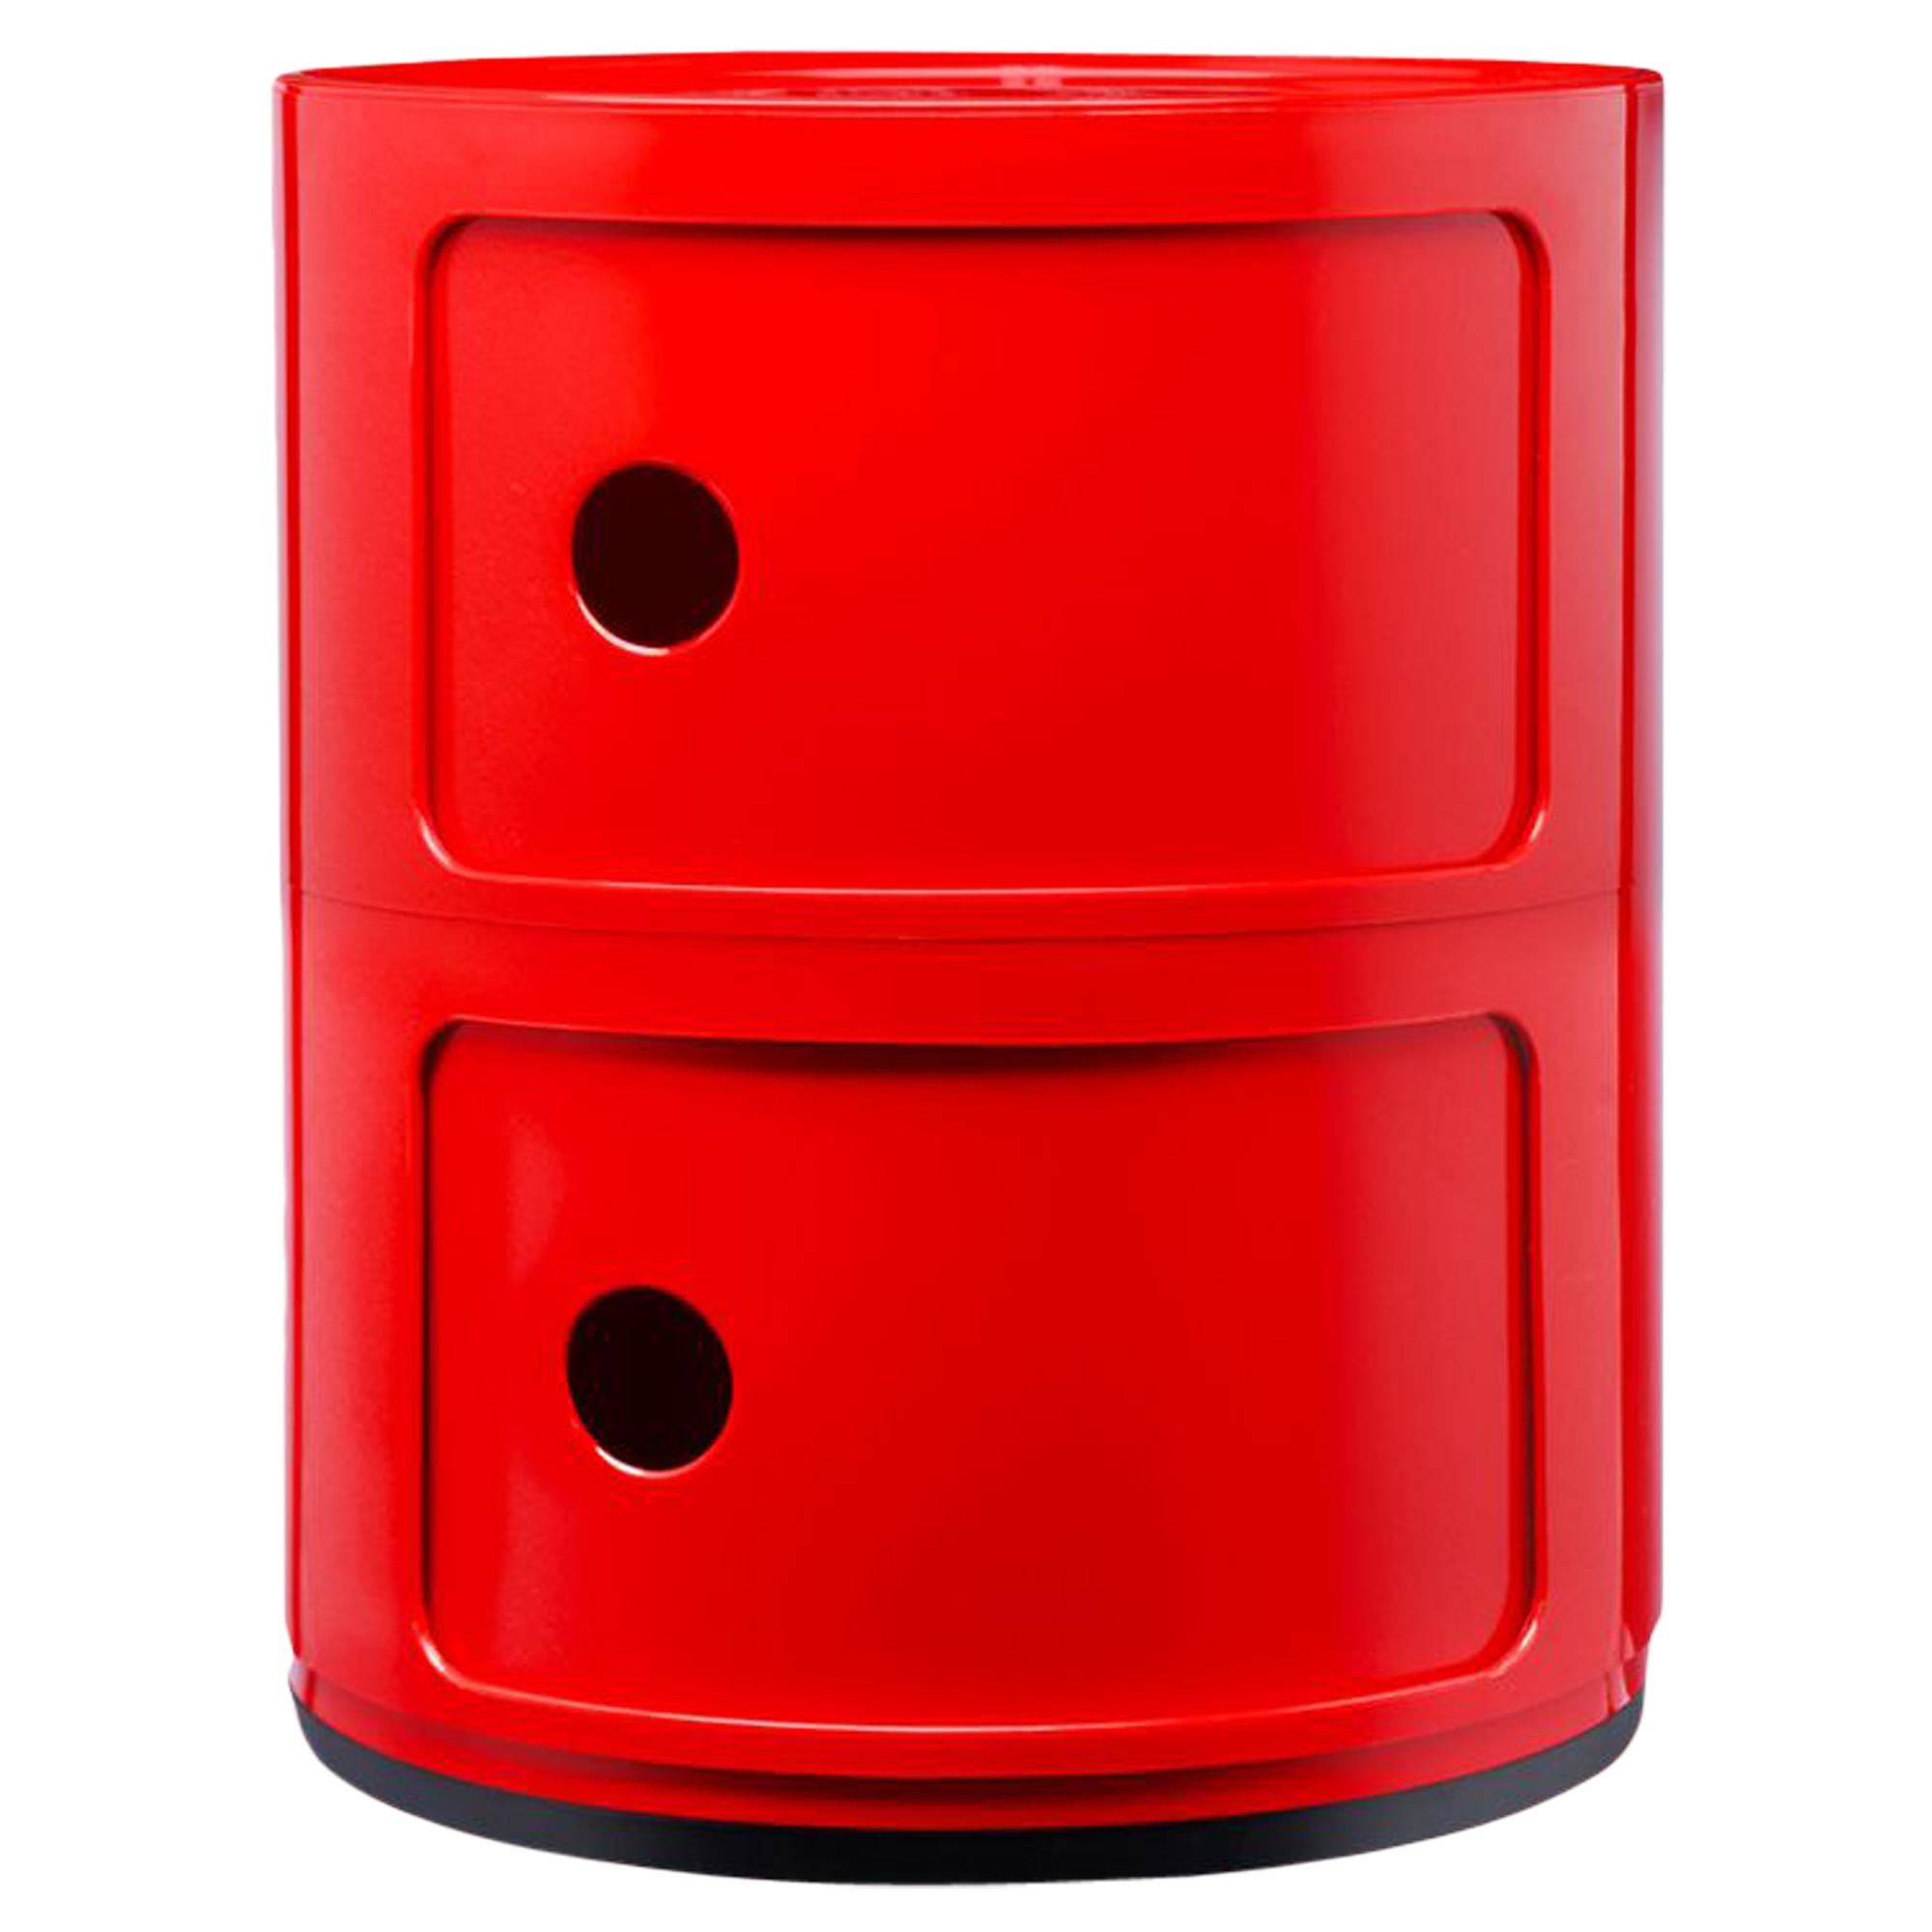 Kartell Componibili 2-Tier Drawer in Red by Anna Castelli Ferrieri For Sale